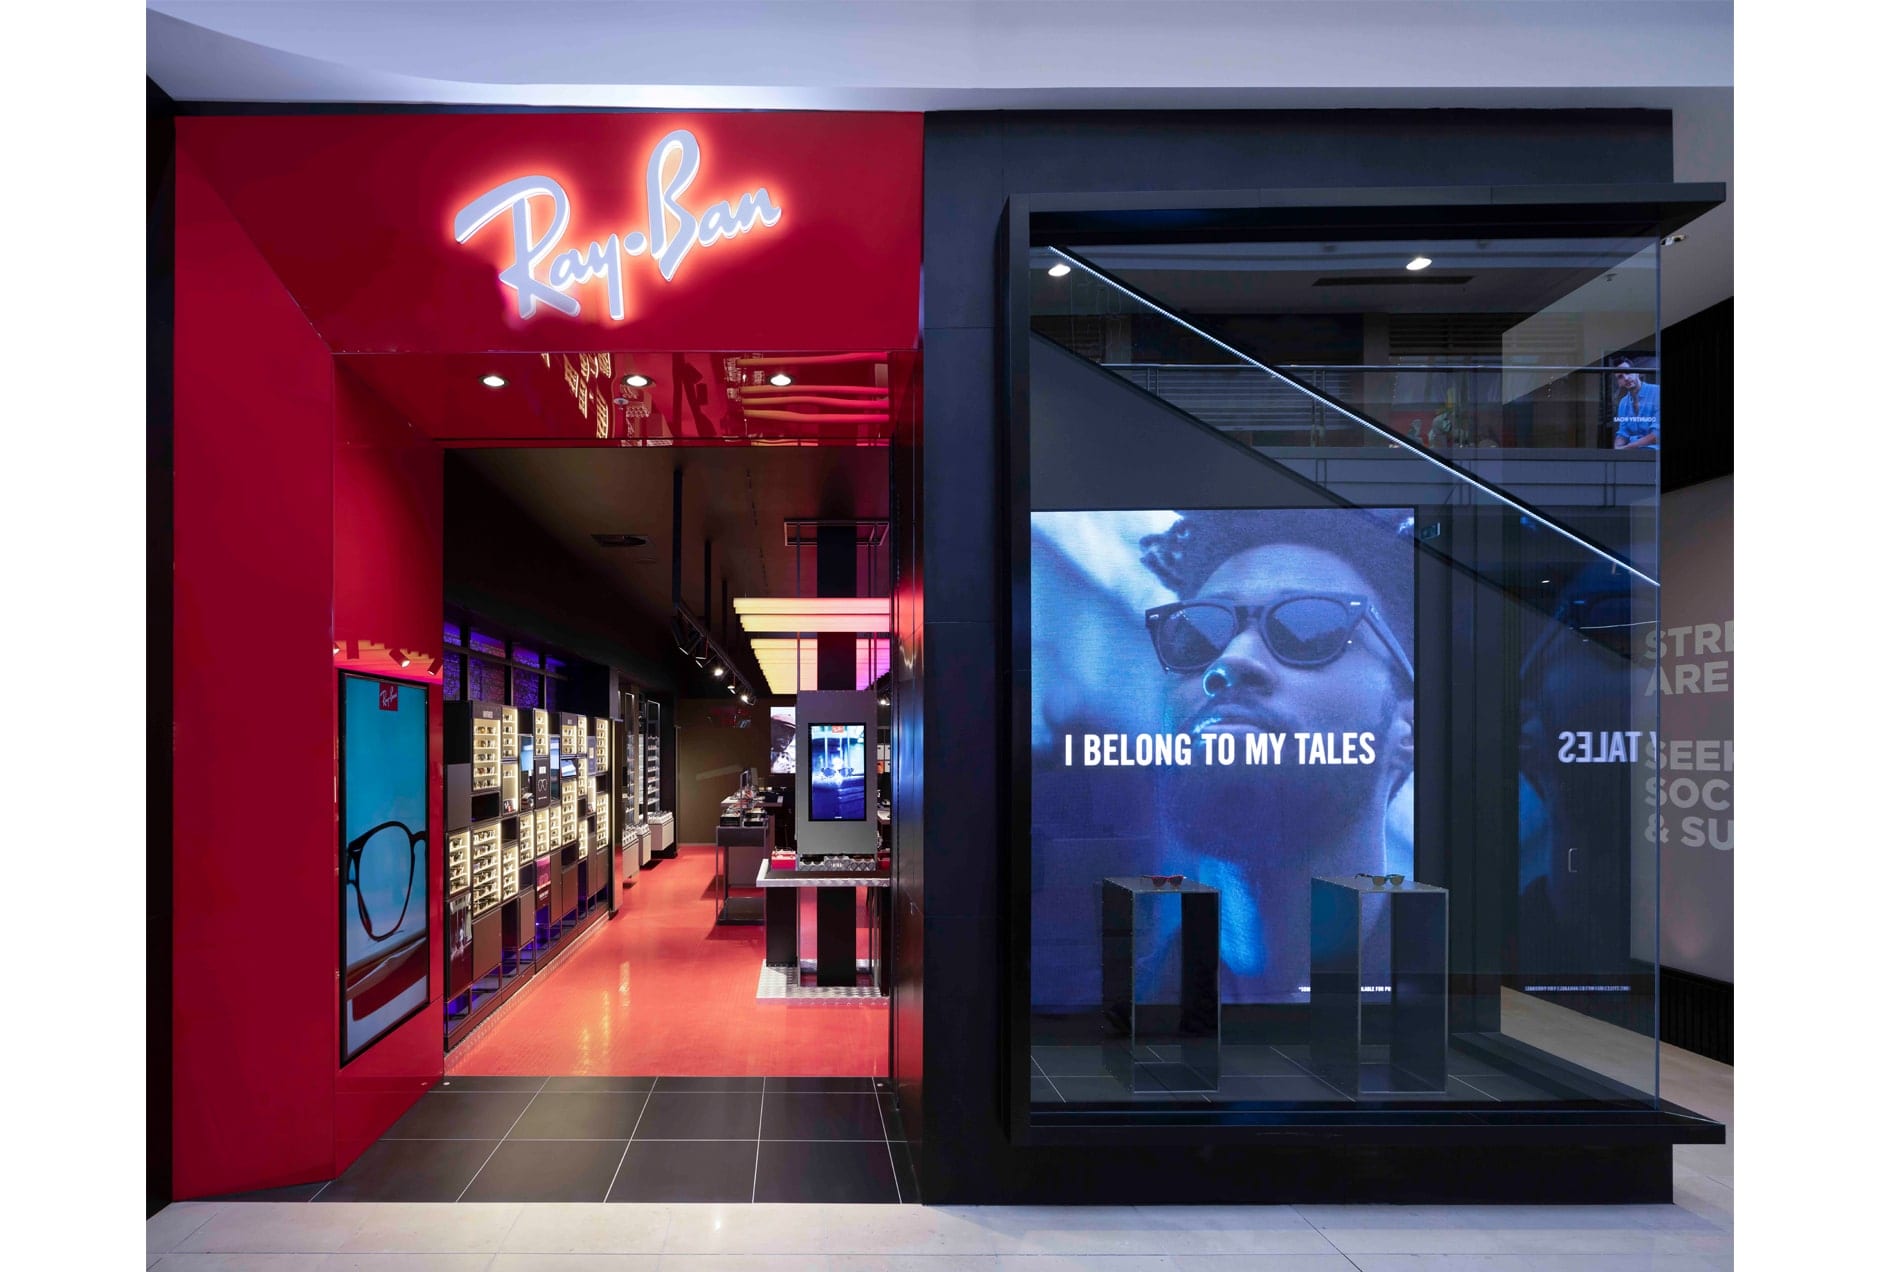 Cult favourite Ray-Ban arrives at 